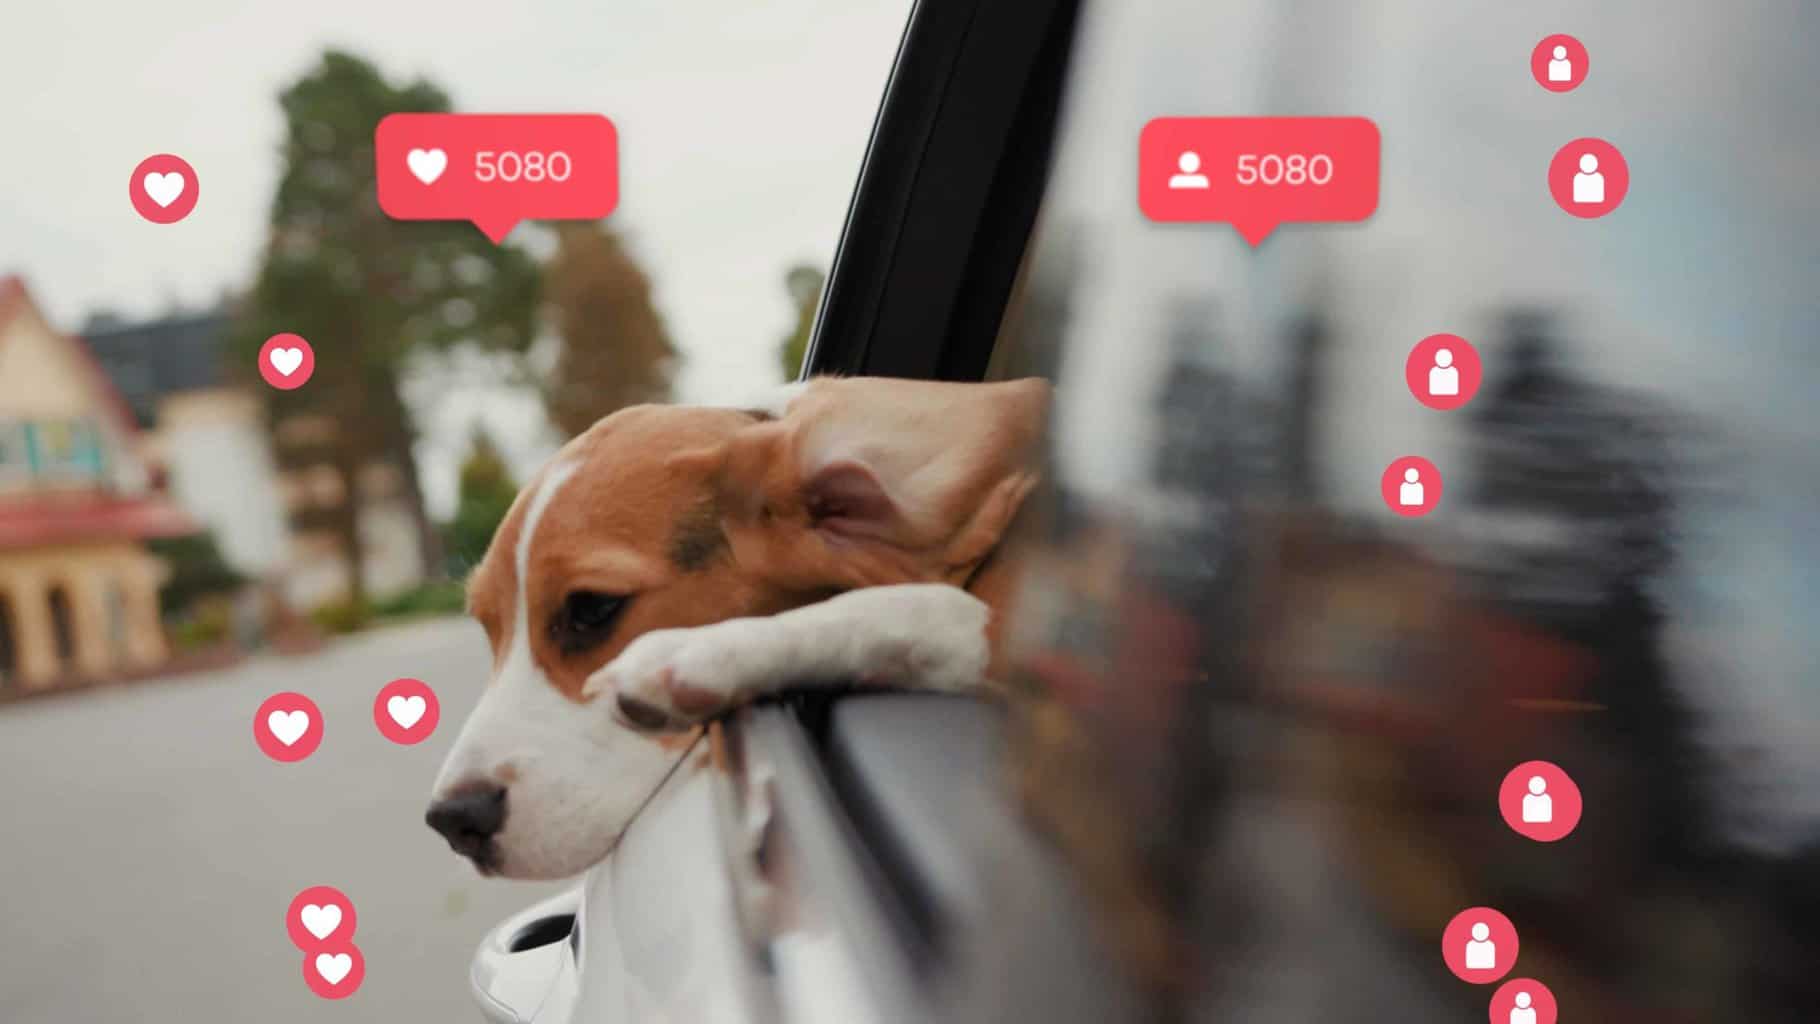 Beagle hangs head out of window in post on social media. Use these tips to turn your dog into a social media star. Even if your dog doesn't become famous, you’ll have fun making content.